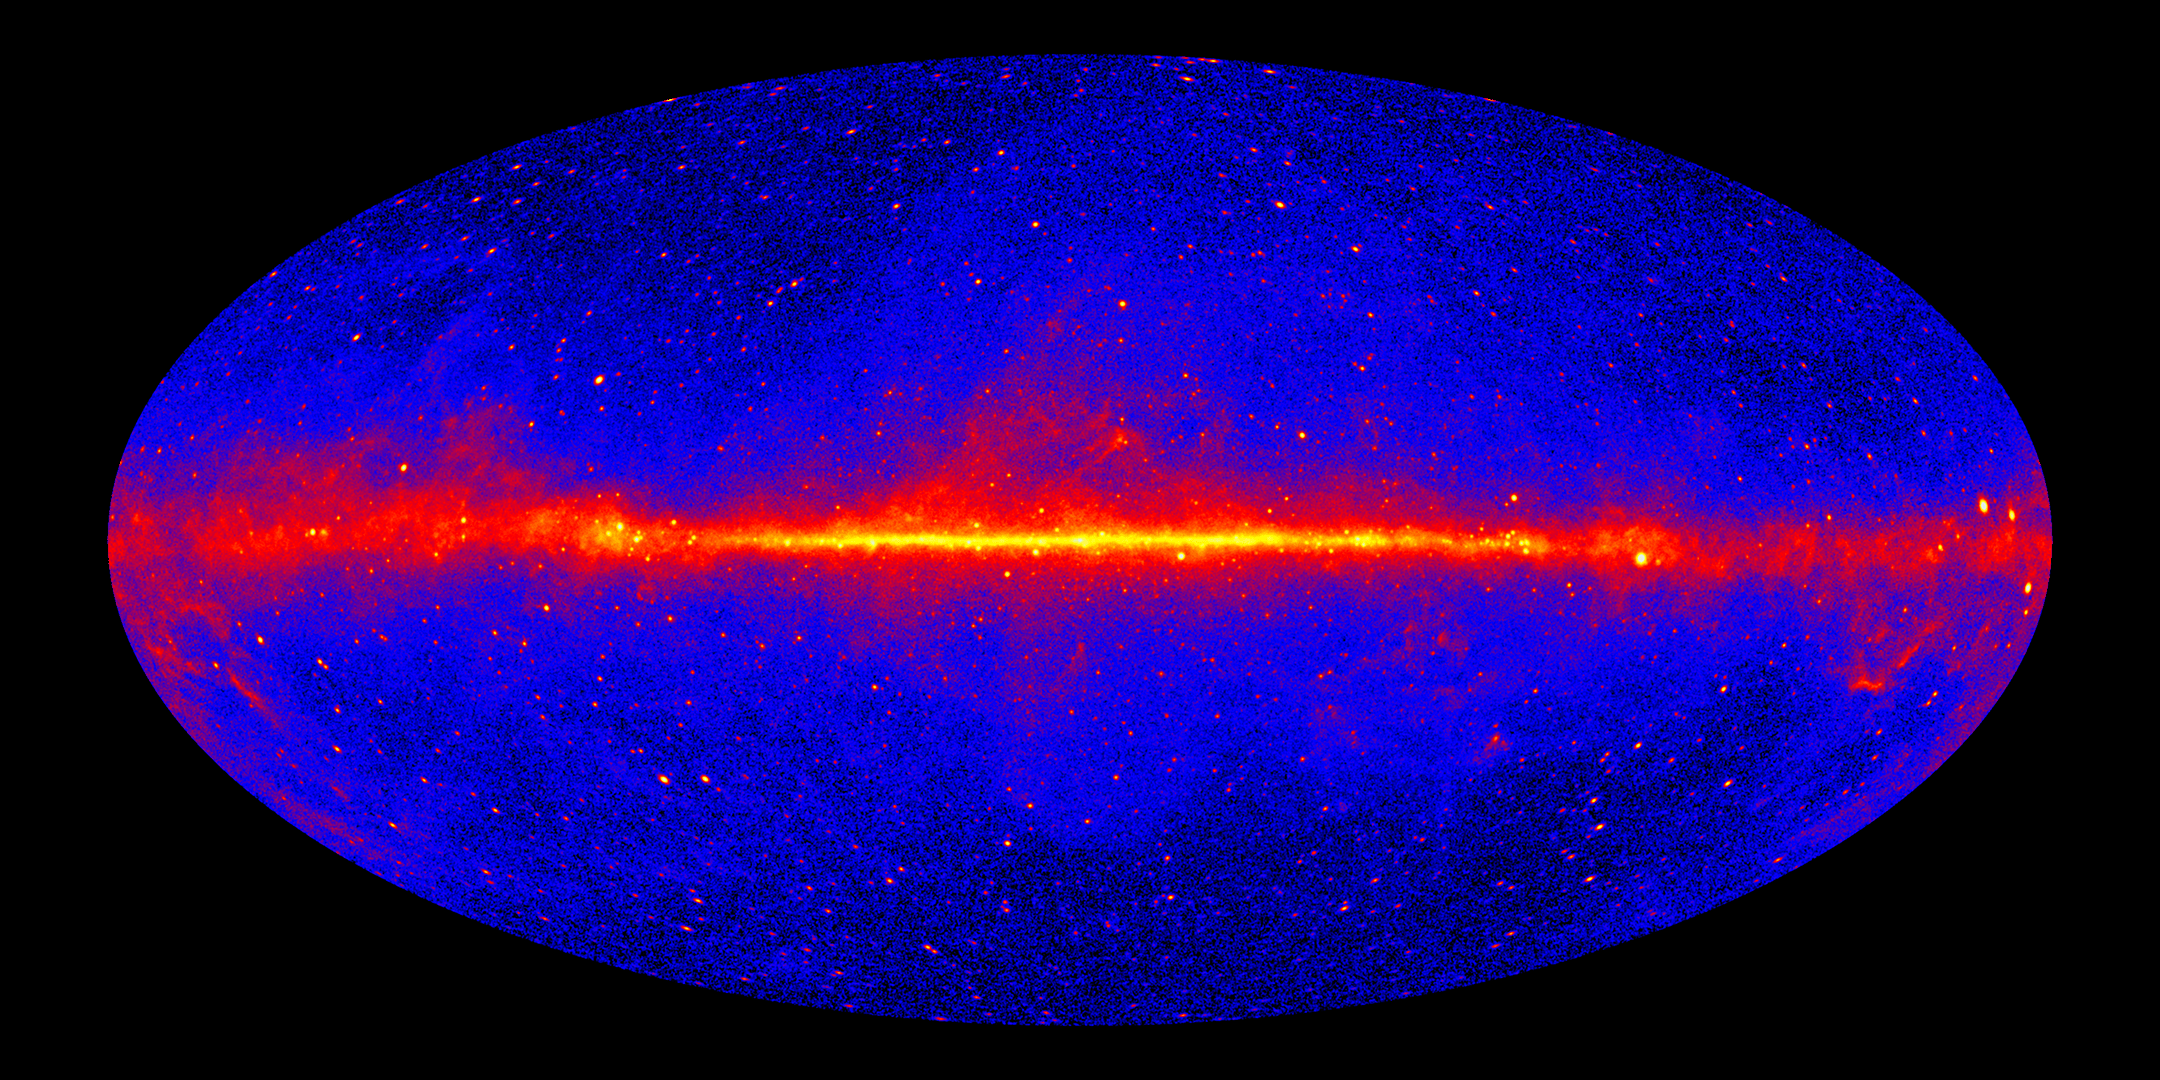 This image shows the entire sky as seen by Fermi's Large Area Telescope